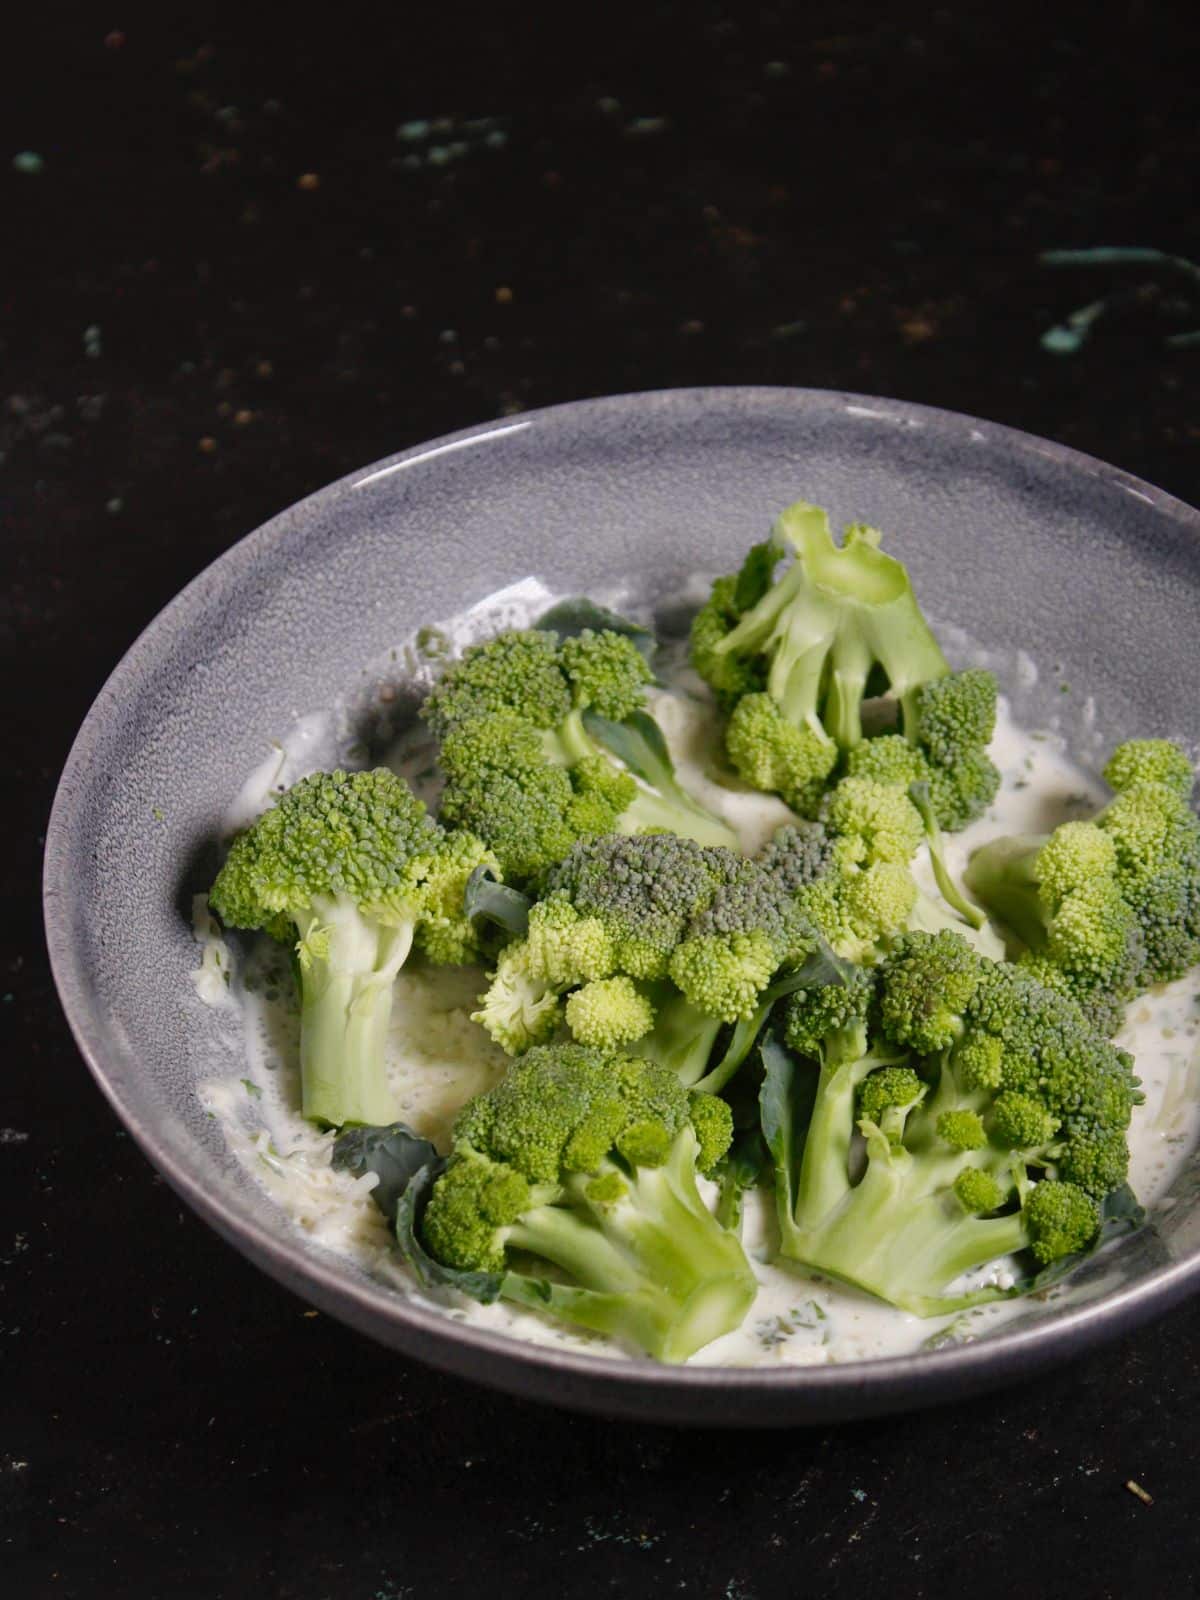 add pieces of broccoli into the bowl and mix well  